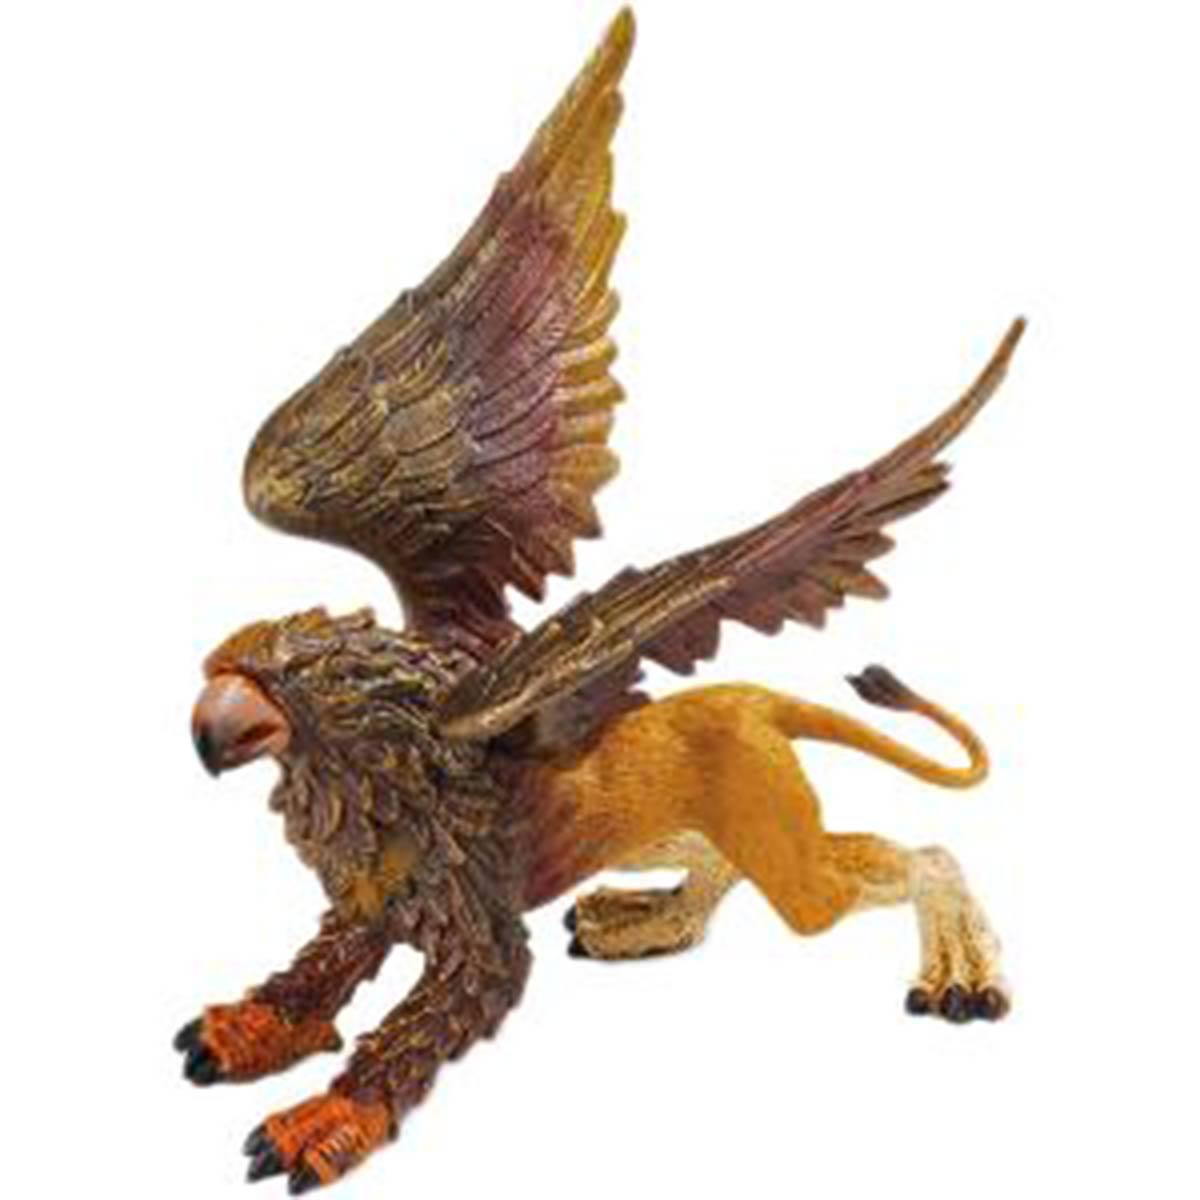 mythical griffin stuffed animal